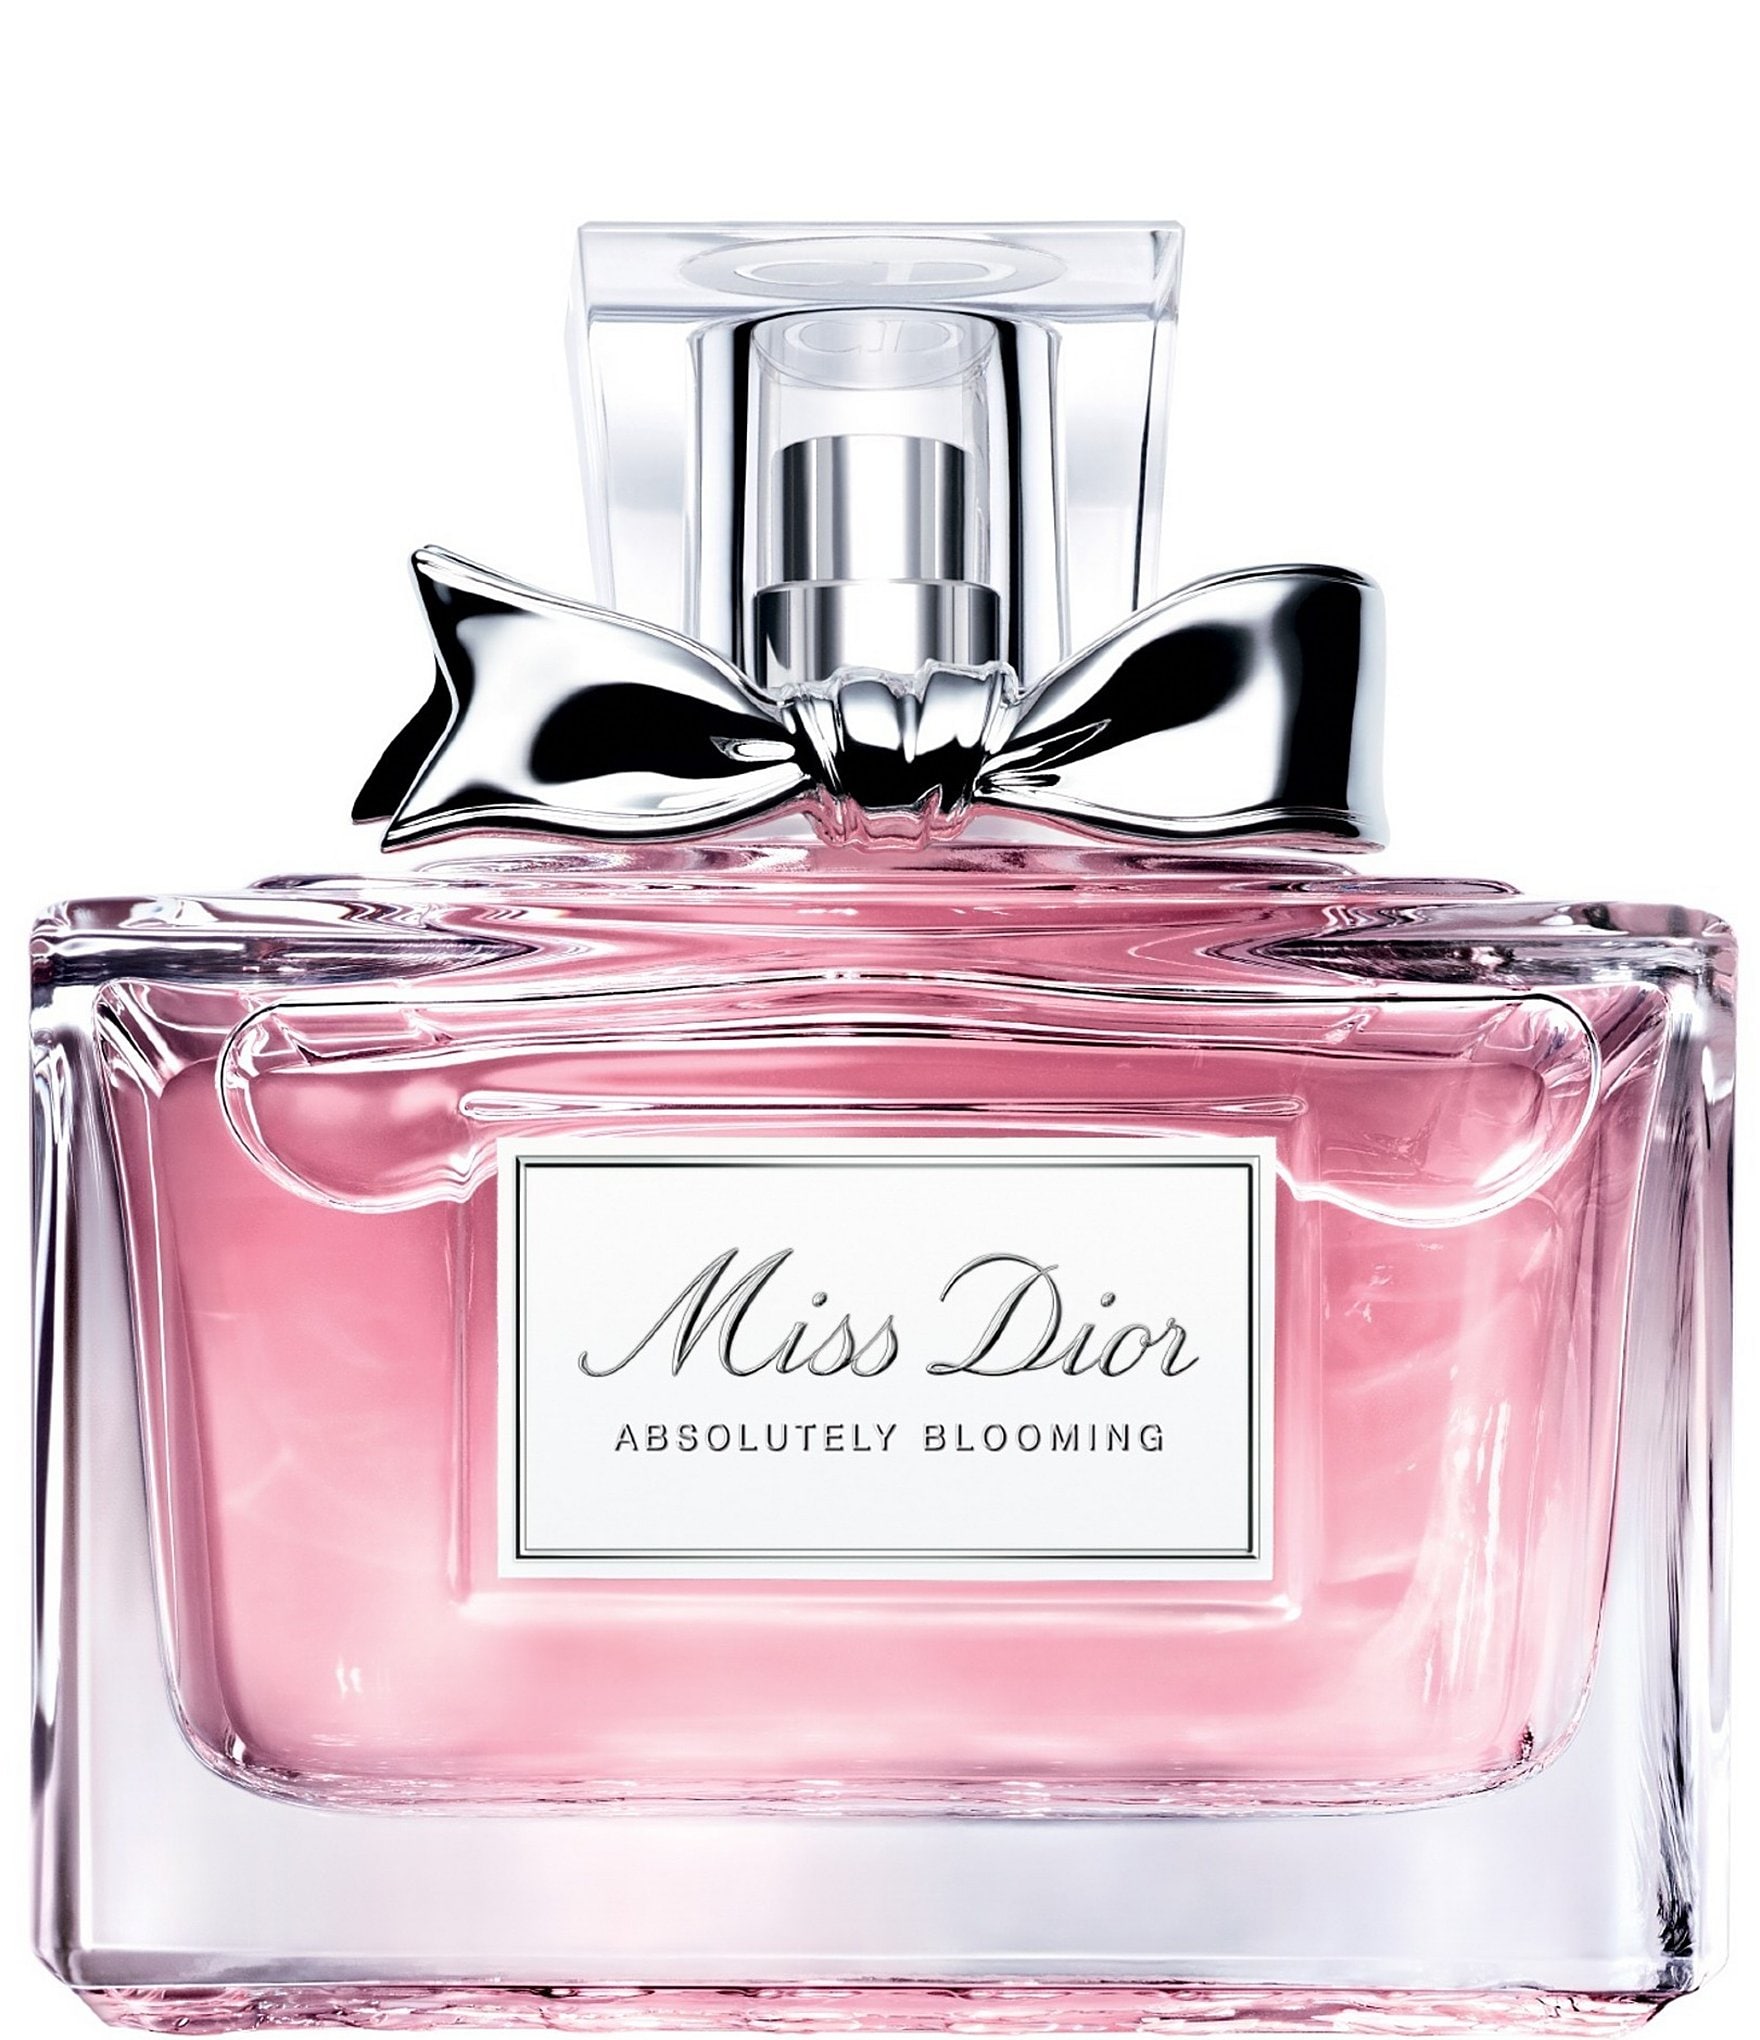 miss dior absolut blooming